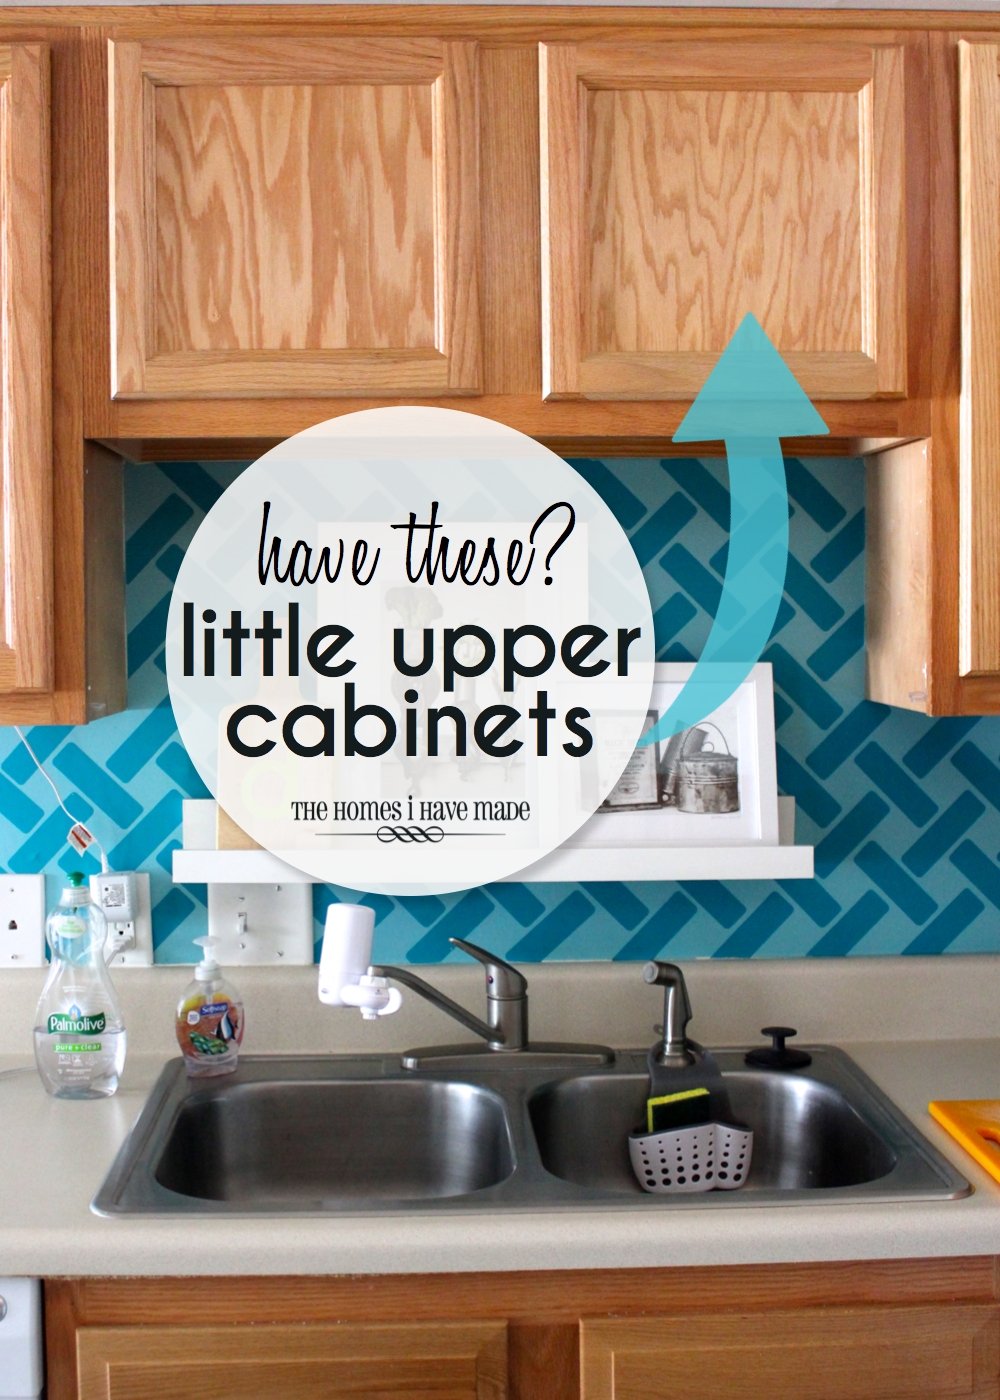 Storage Ideas for Little Upper Cabinets | The Homes I Have ...